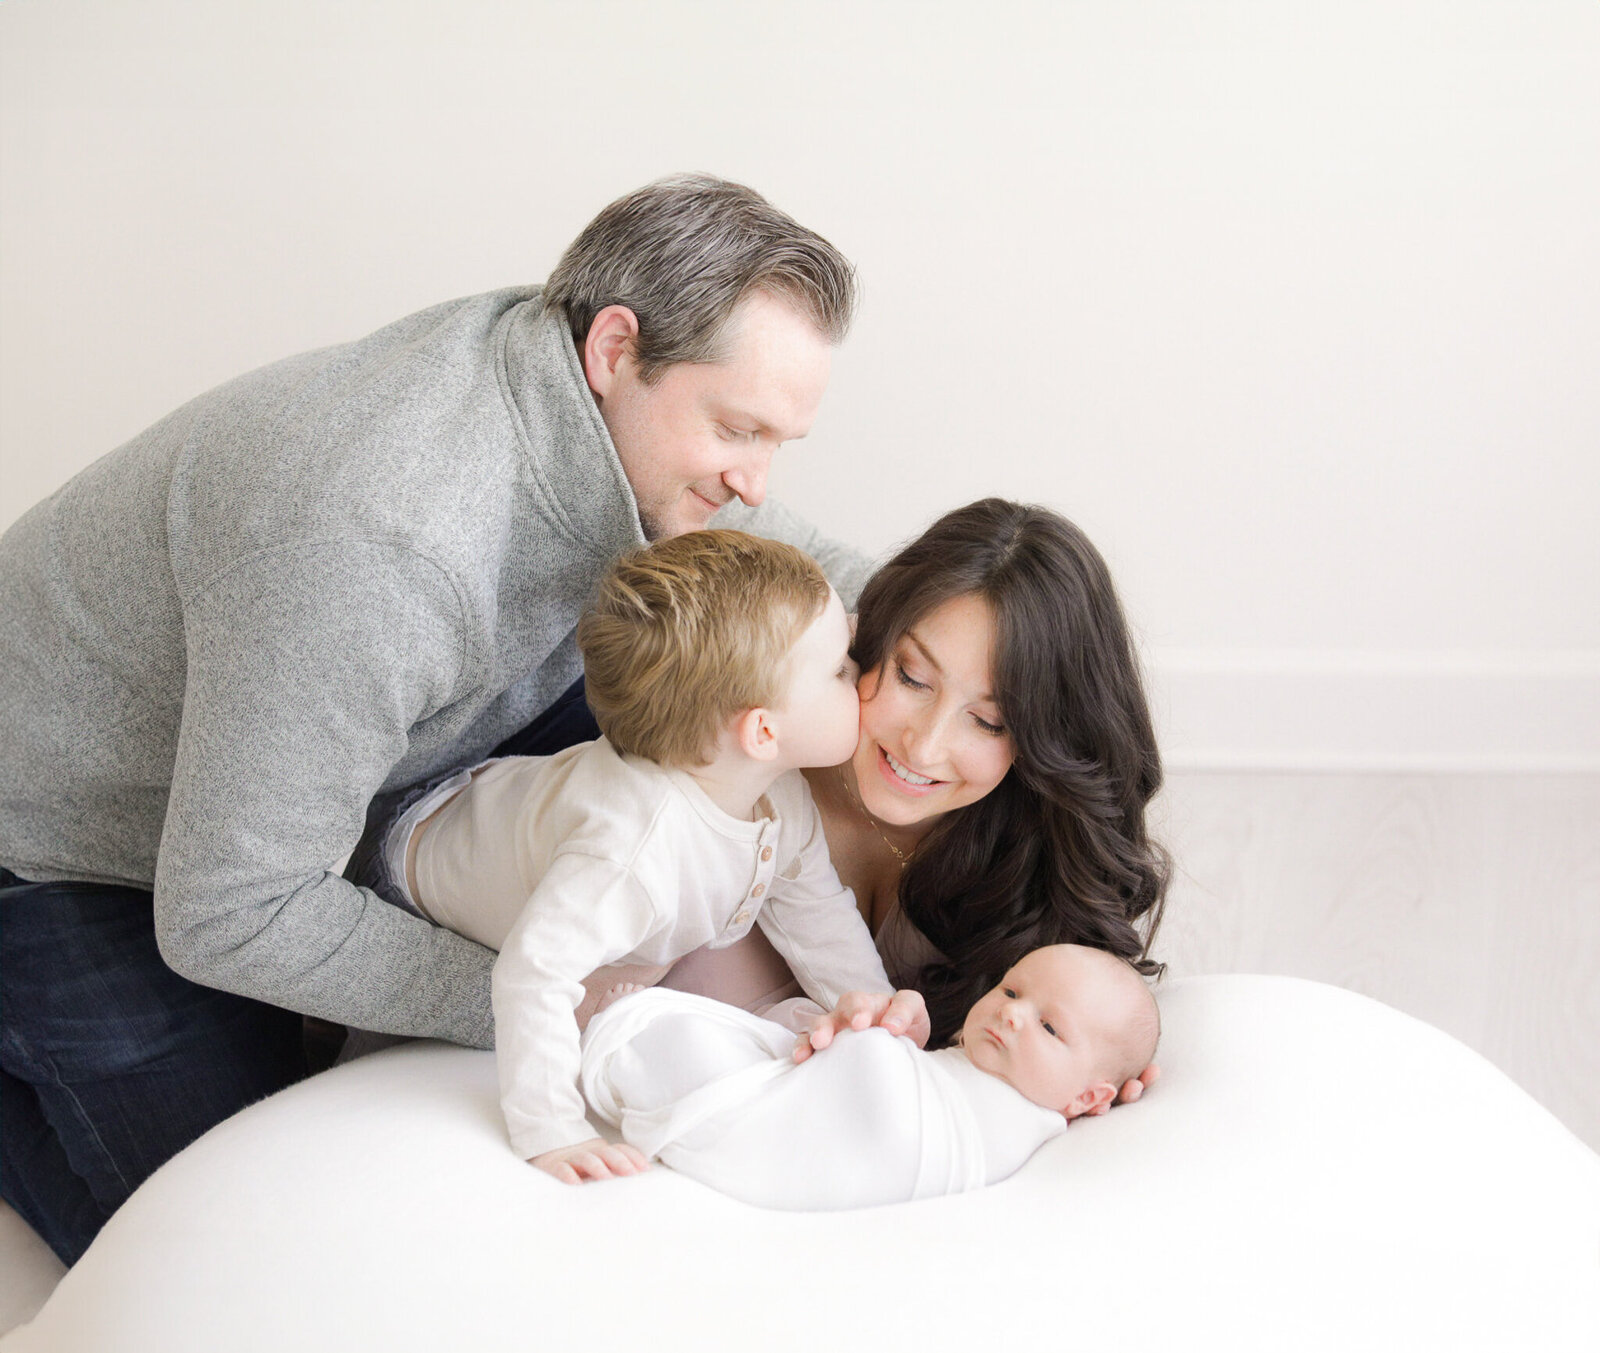 toddler kisses mom on the cheek while dad looks on and newborn baby lays on beanbag during connecticut newborn sessions